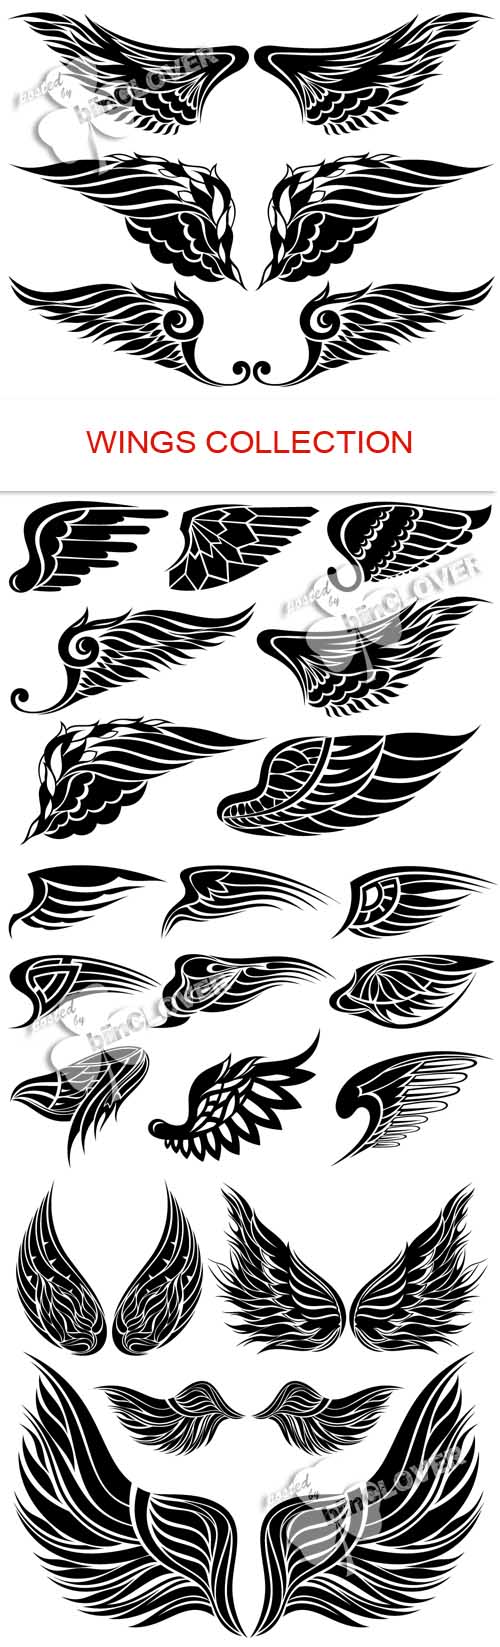 Wings collection 0485